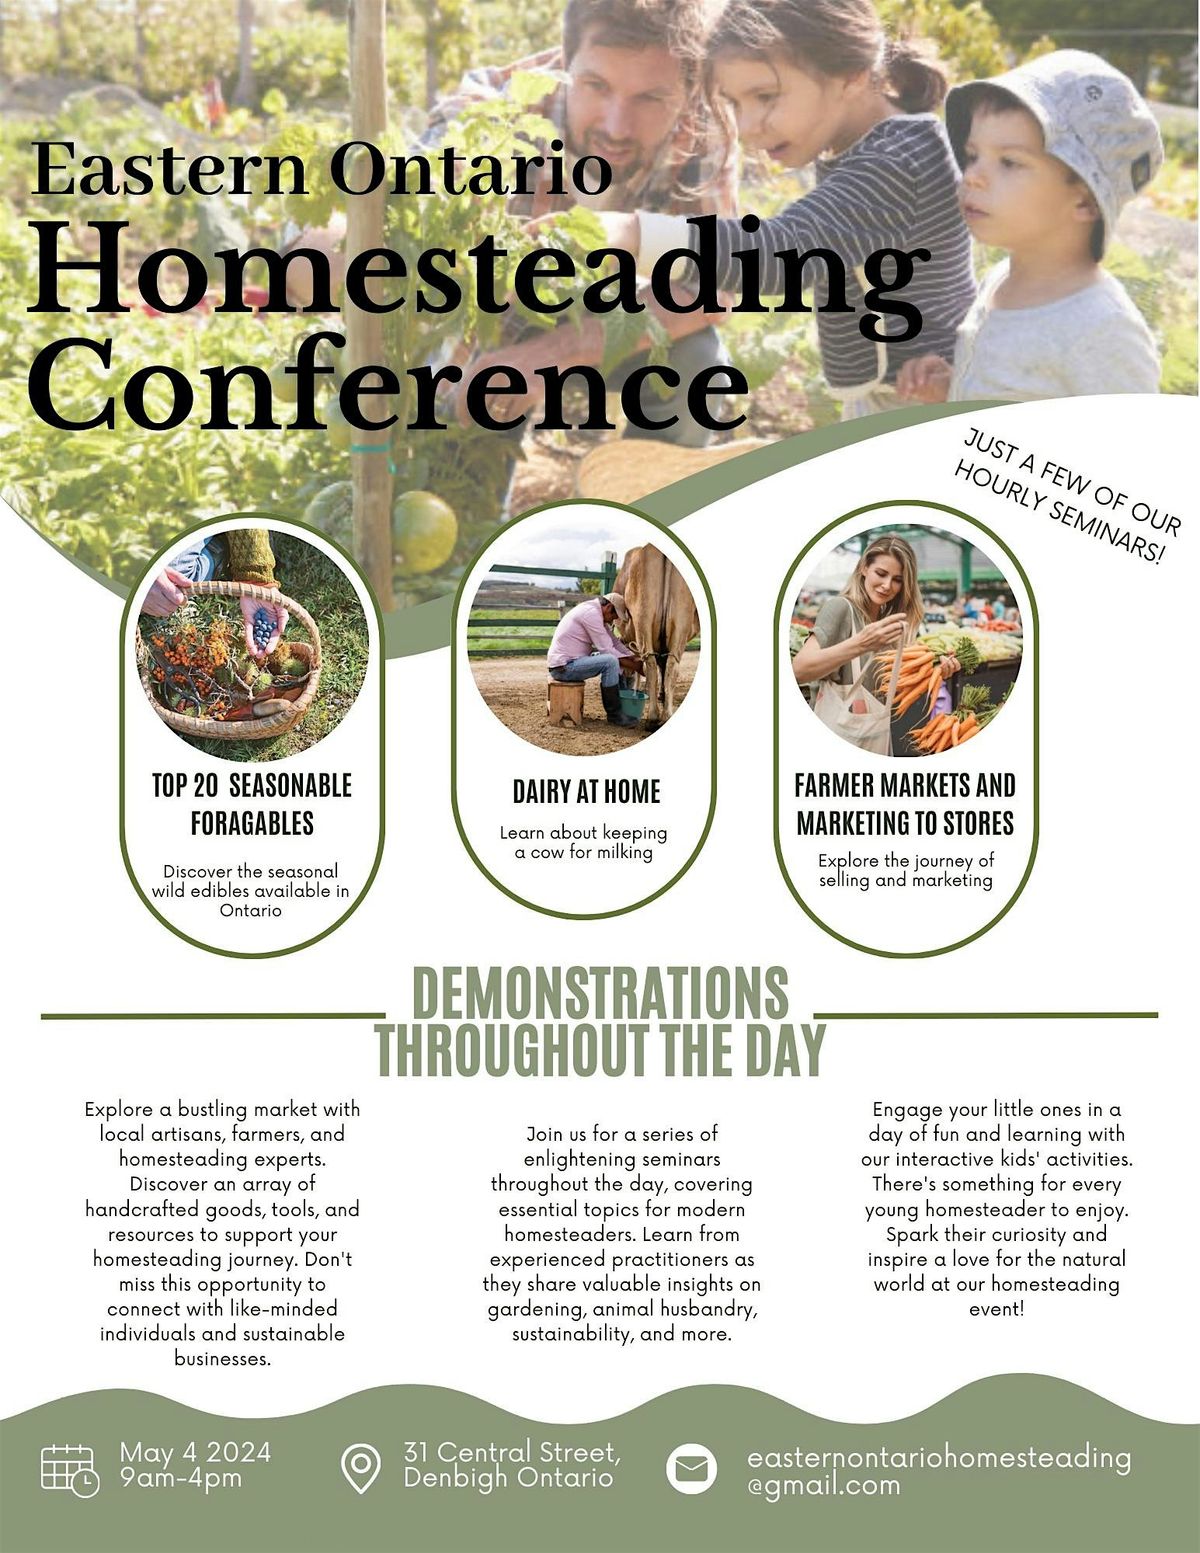 Eastern Ontario Homesteading Conference